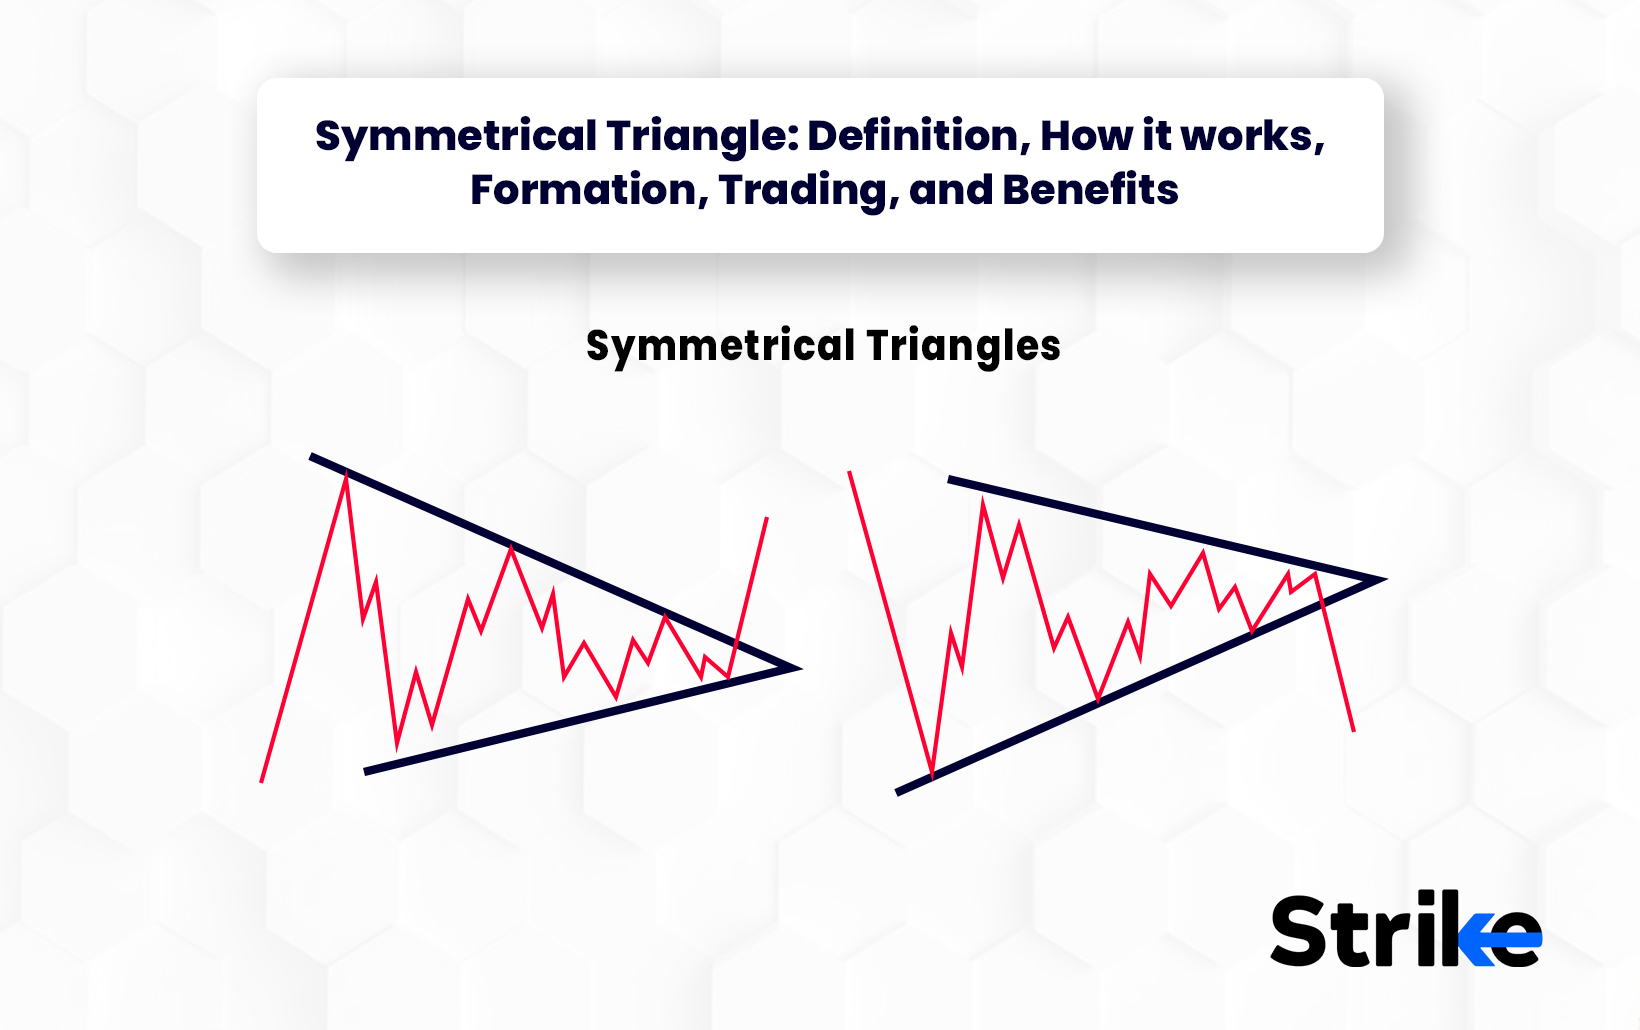 Symmetrical Triangle: Definition, How It Works, Formation, Trading, and Benefits